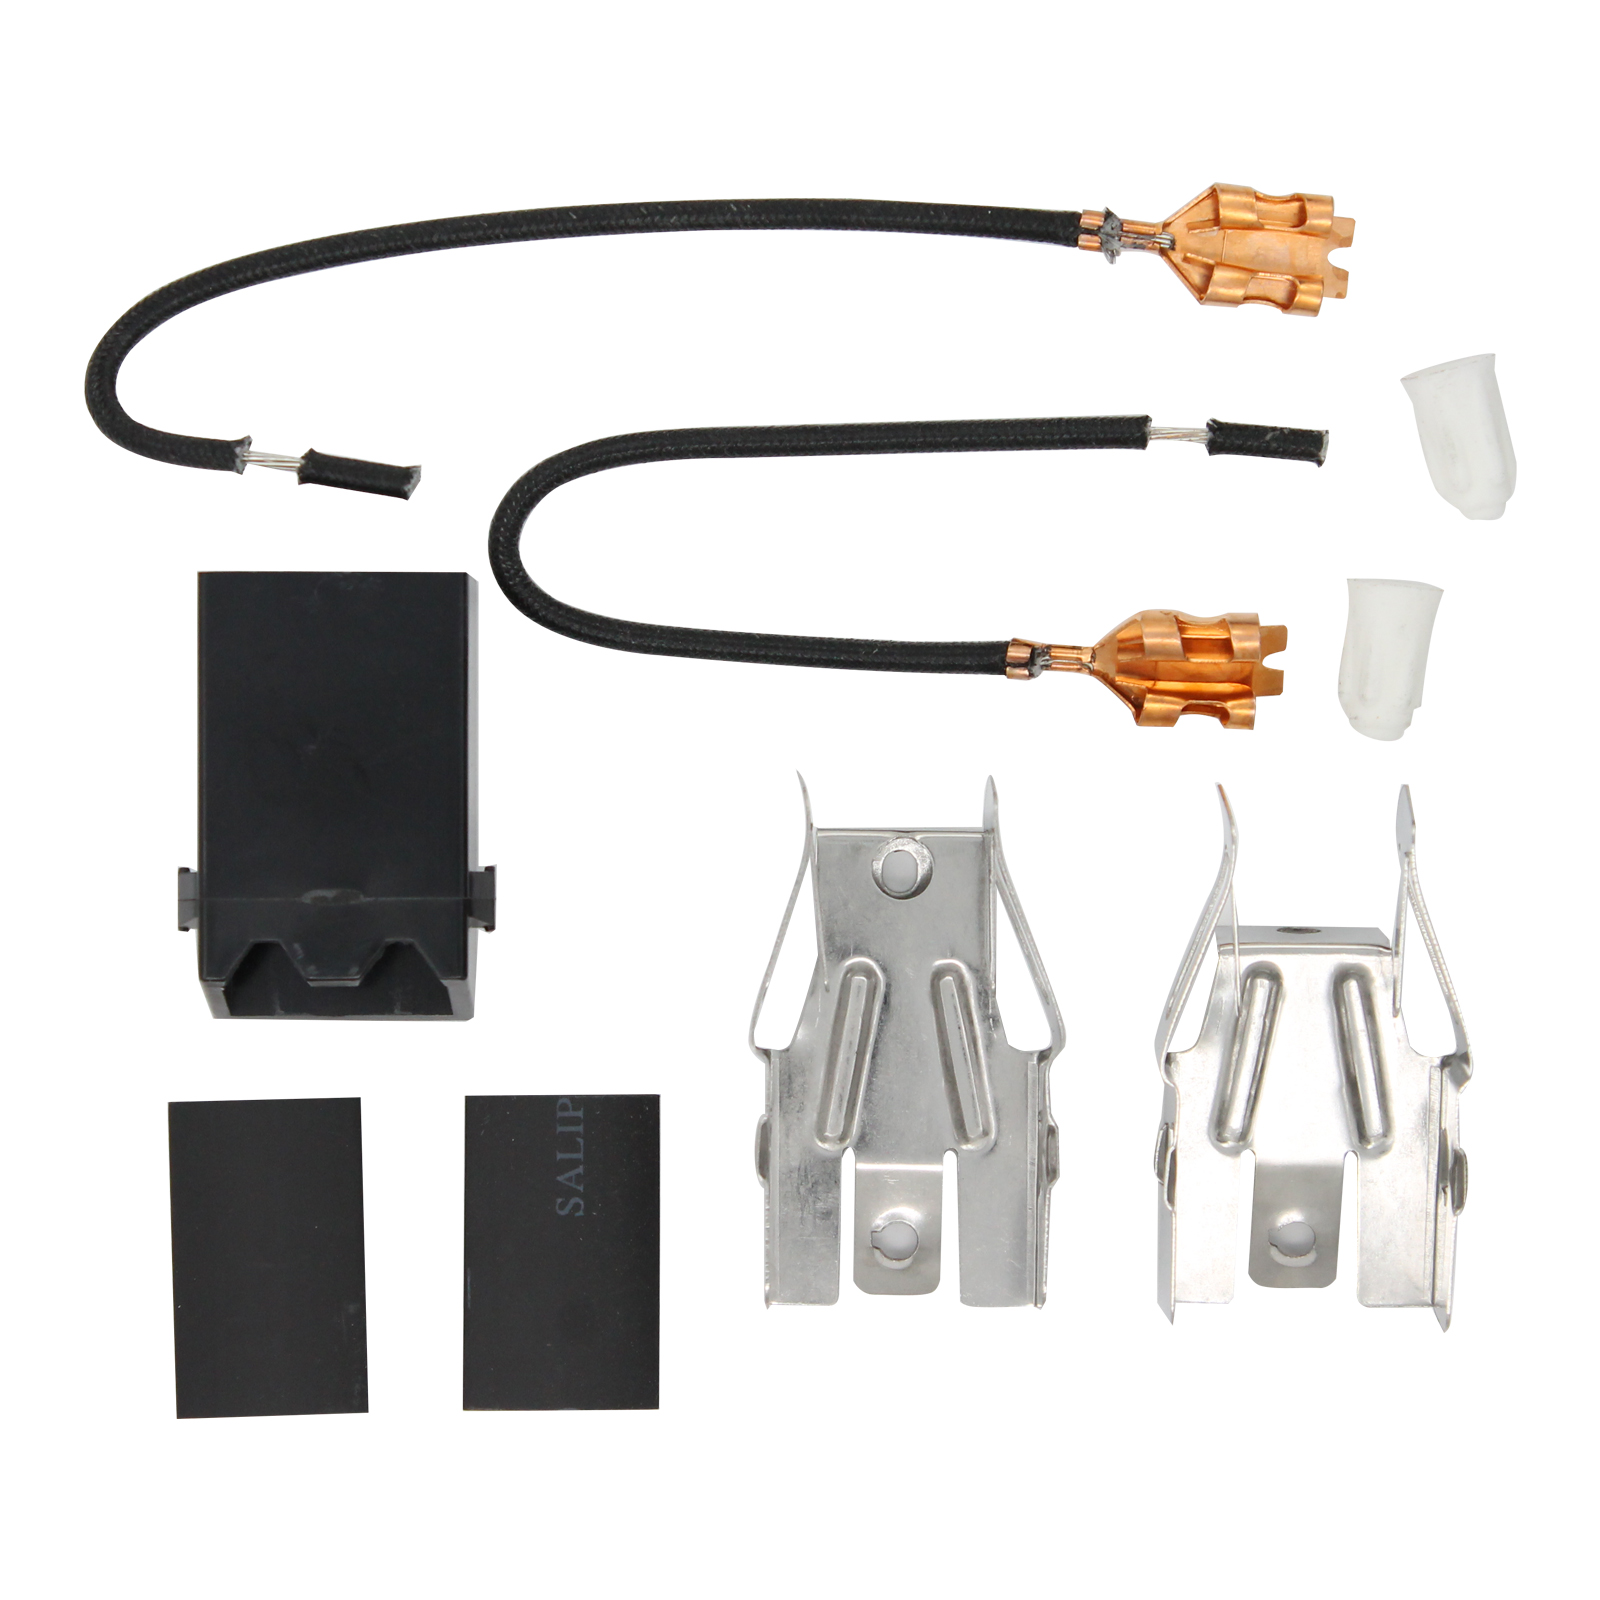 330031 Top Burner Receptacle Kit Replacement for Whirlpool F5808W0 Range/Cooktop/Oven - Compatible with 330031 Range Burner Receptacle Kit - UpStart Components Brand - image 4 of 4